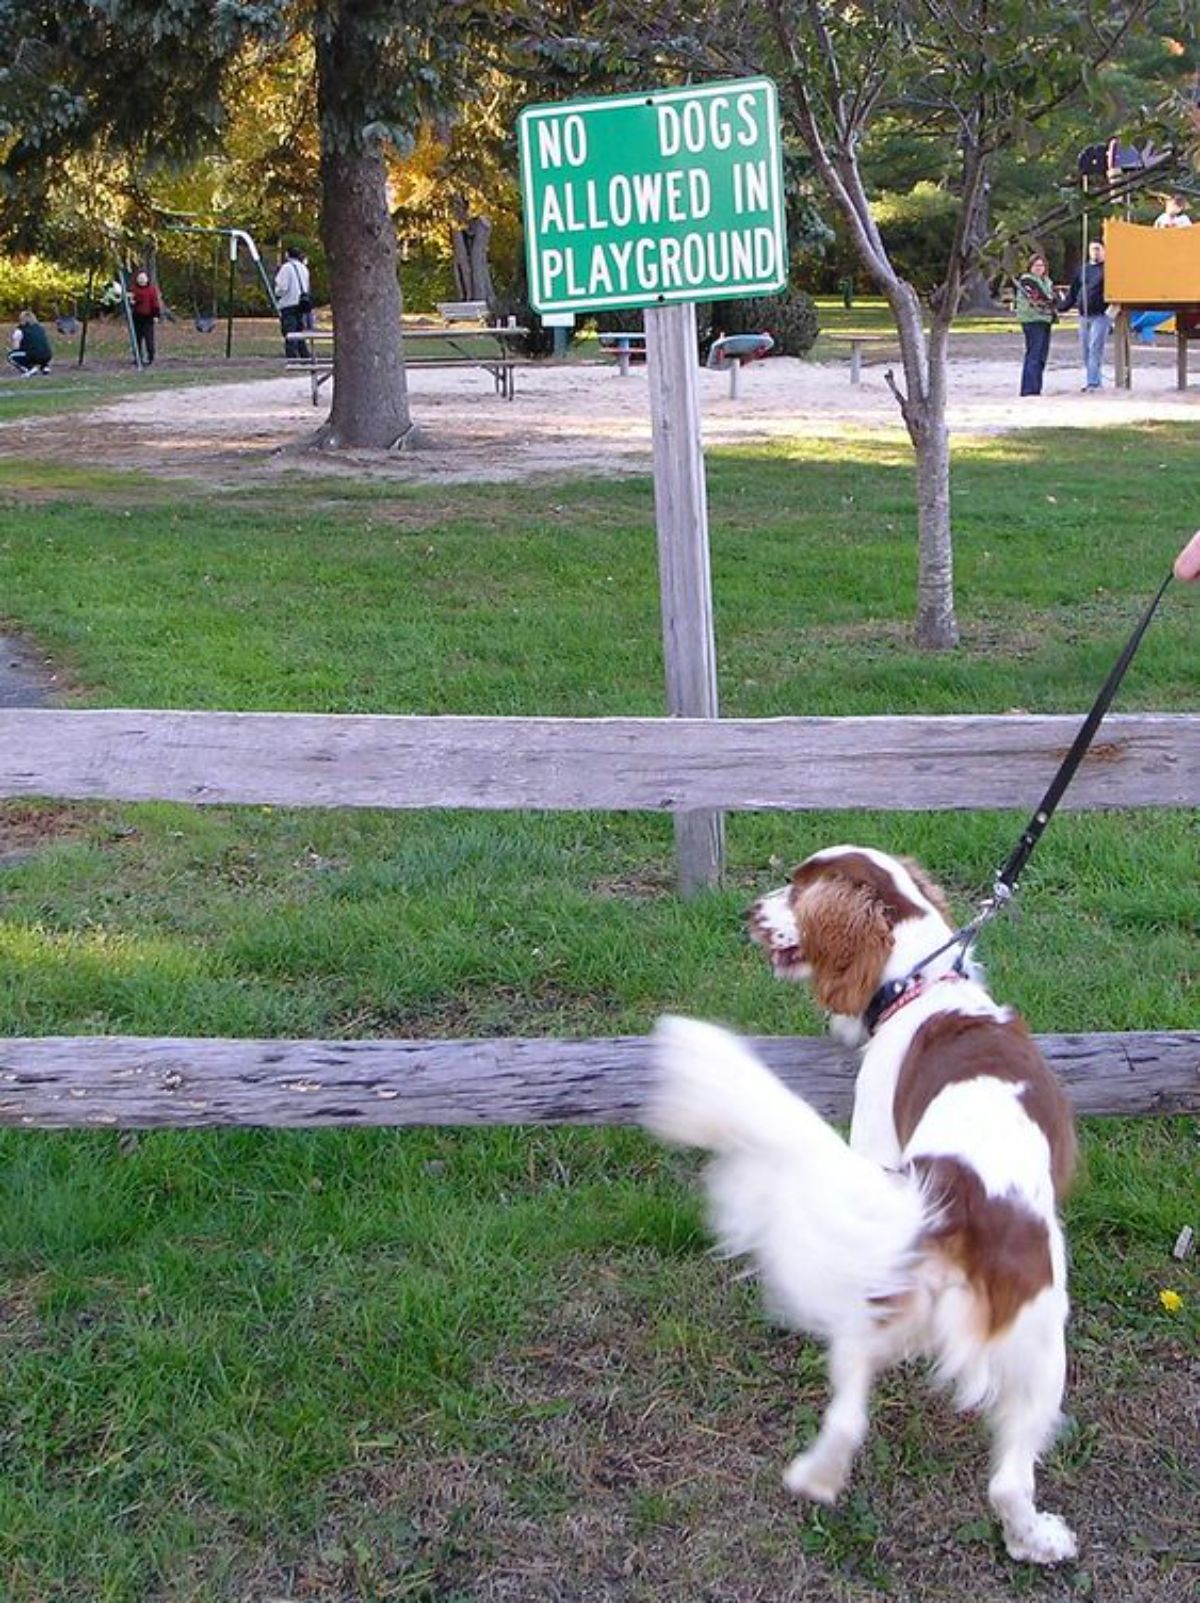 brown and white dog standing by a fence of a playground with a NO DOGS ALLOWED IN PLAYGROUND sign